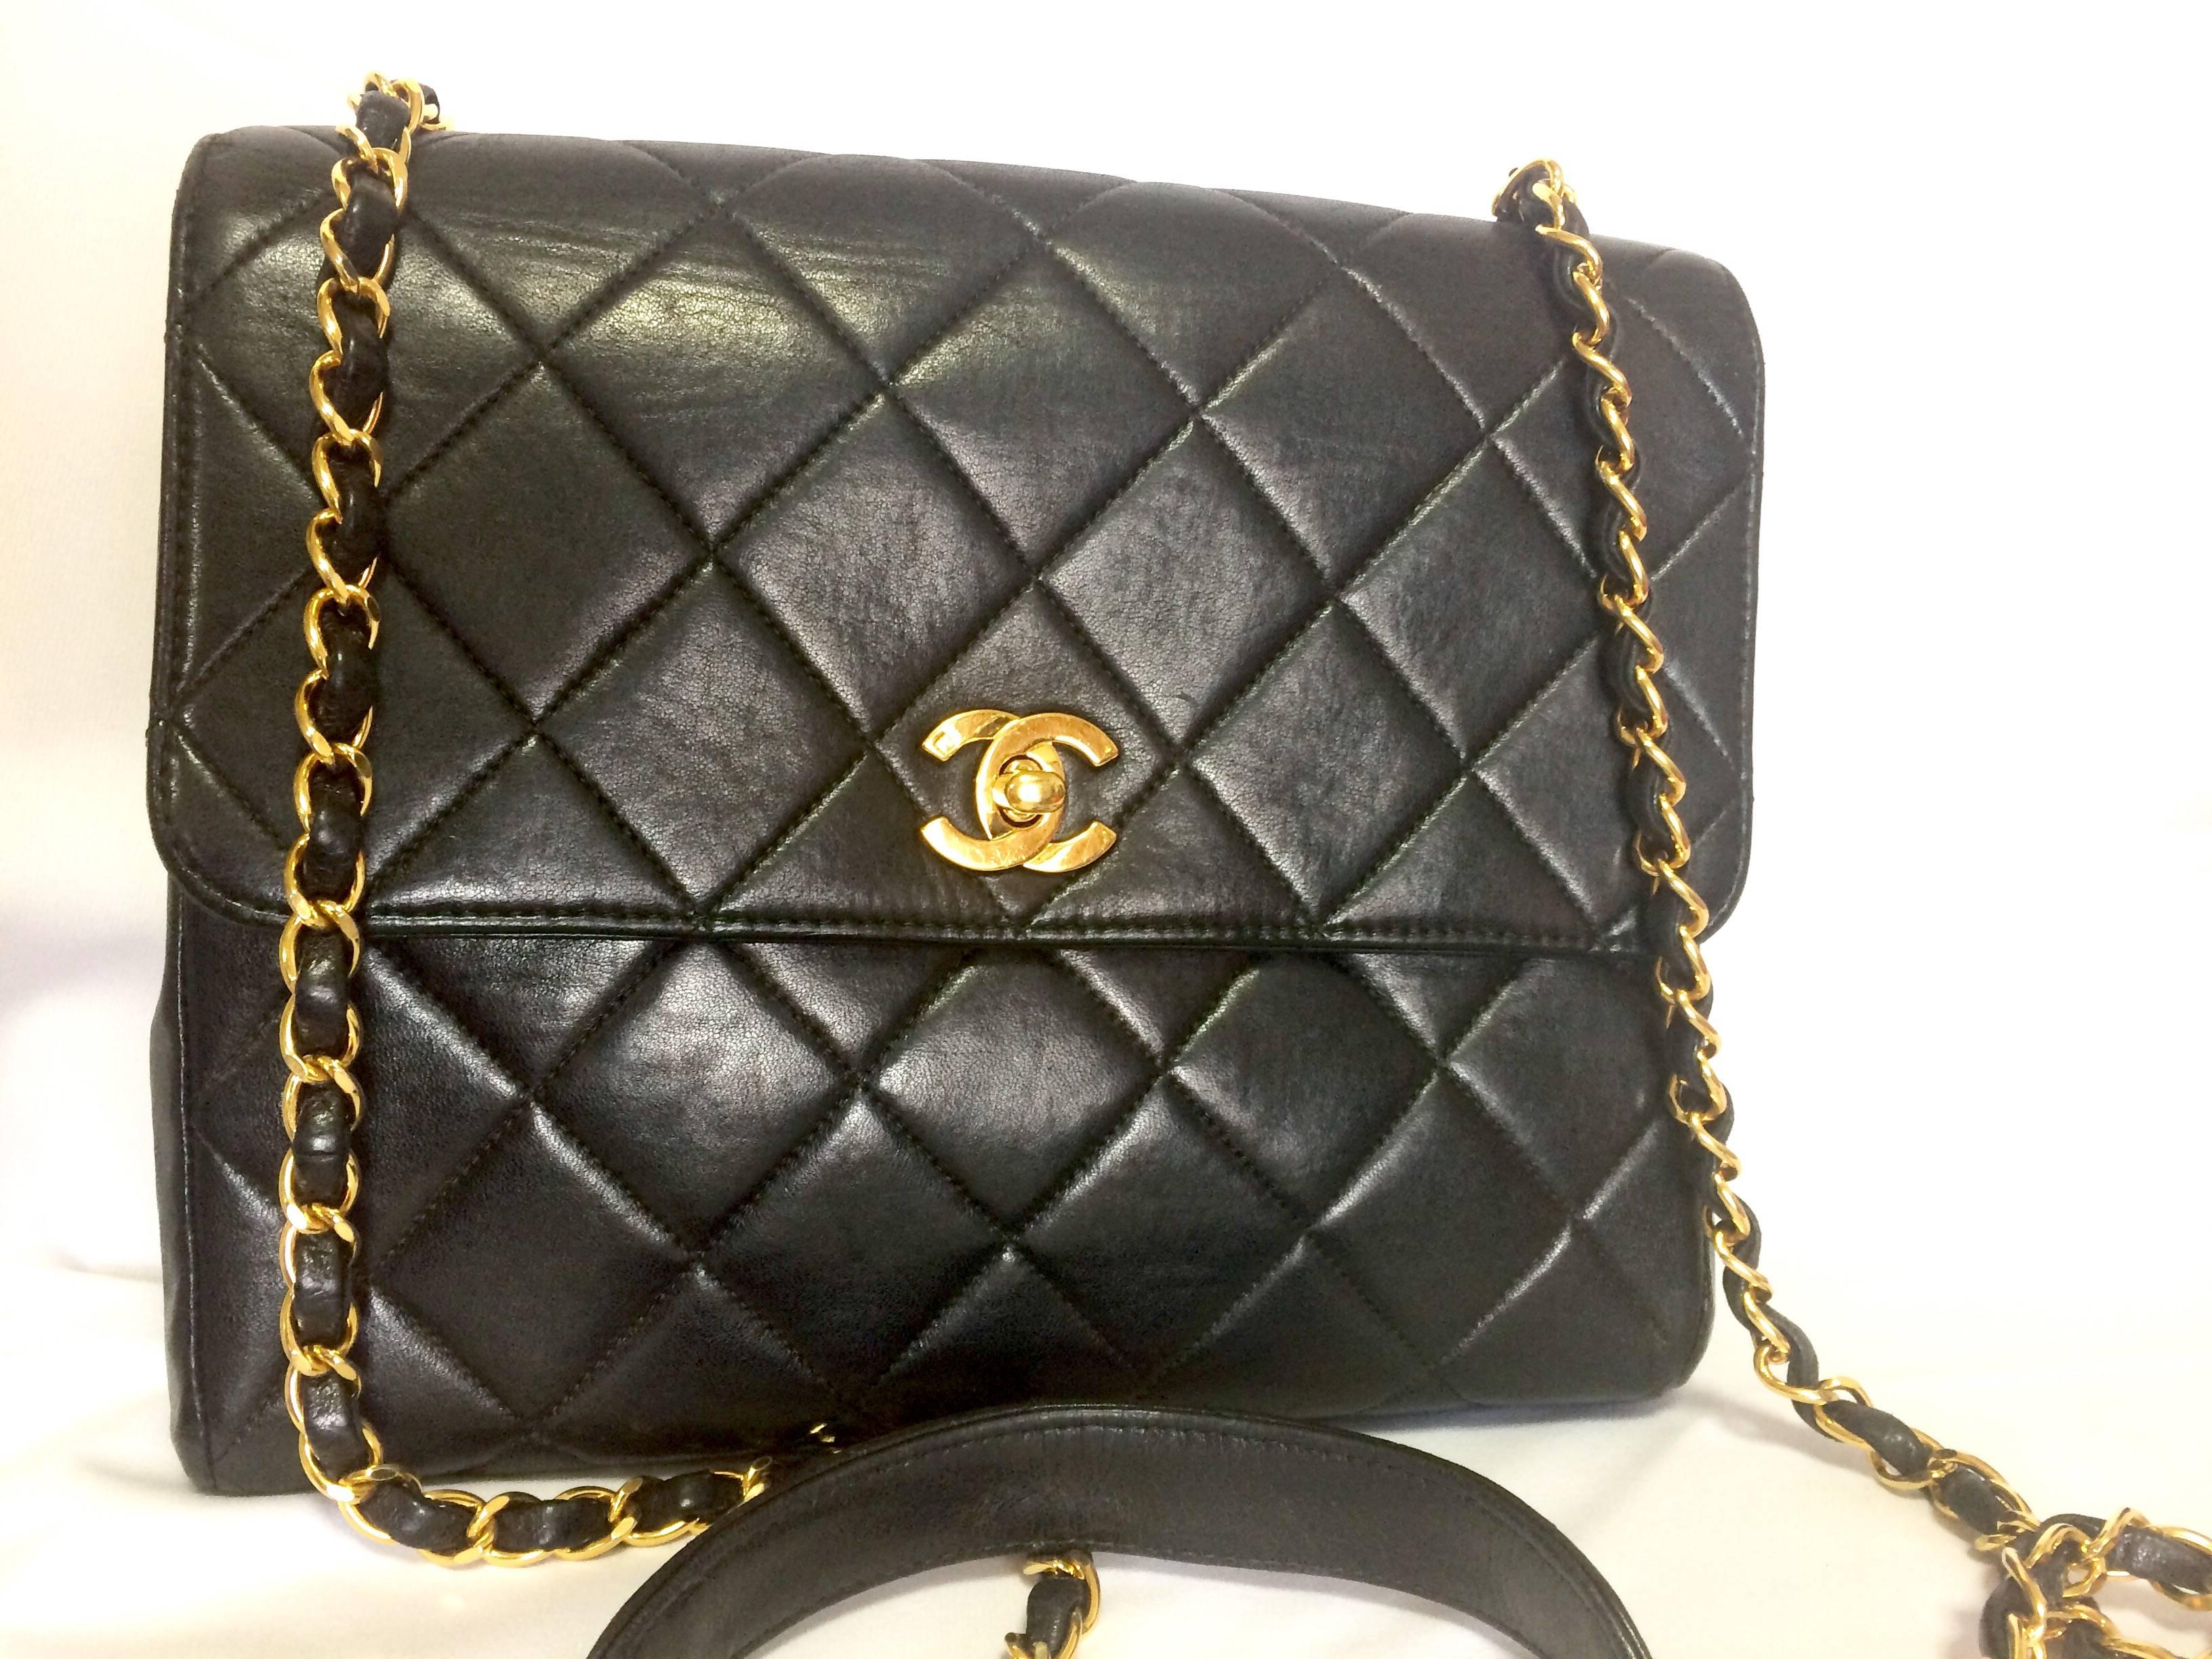 Vintage CHANEL black lamb leather 2.55 classic square shape shoulder bag with golden CC and chain strap. Elegant purse.

Introducing a vintage black lambskin 2.55 classic square shape bag from CHANEL back in the 90's era. 
Classic and popular